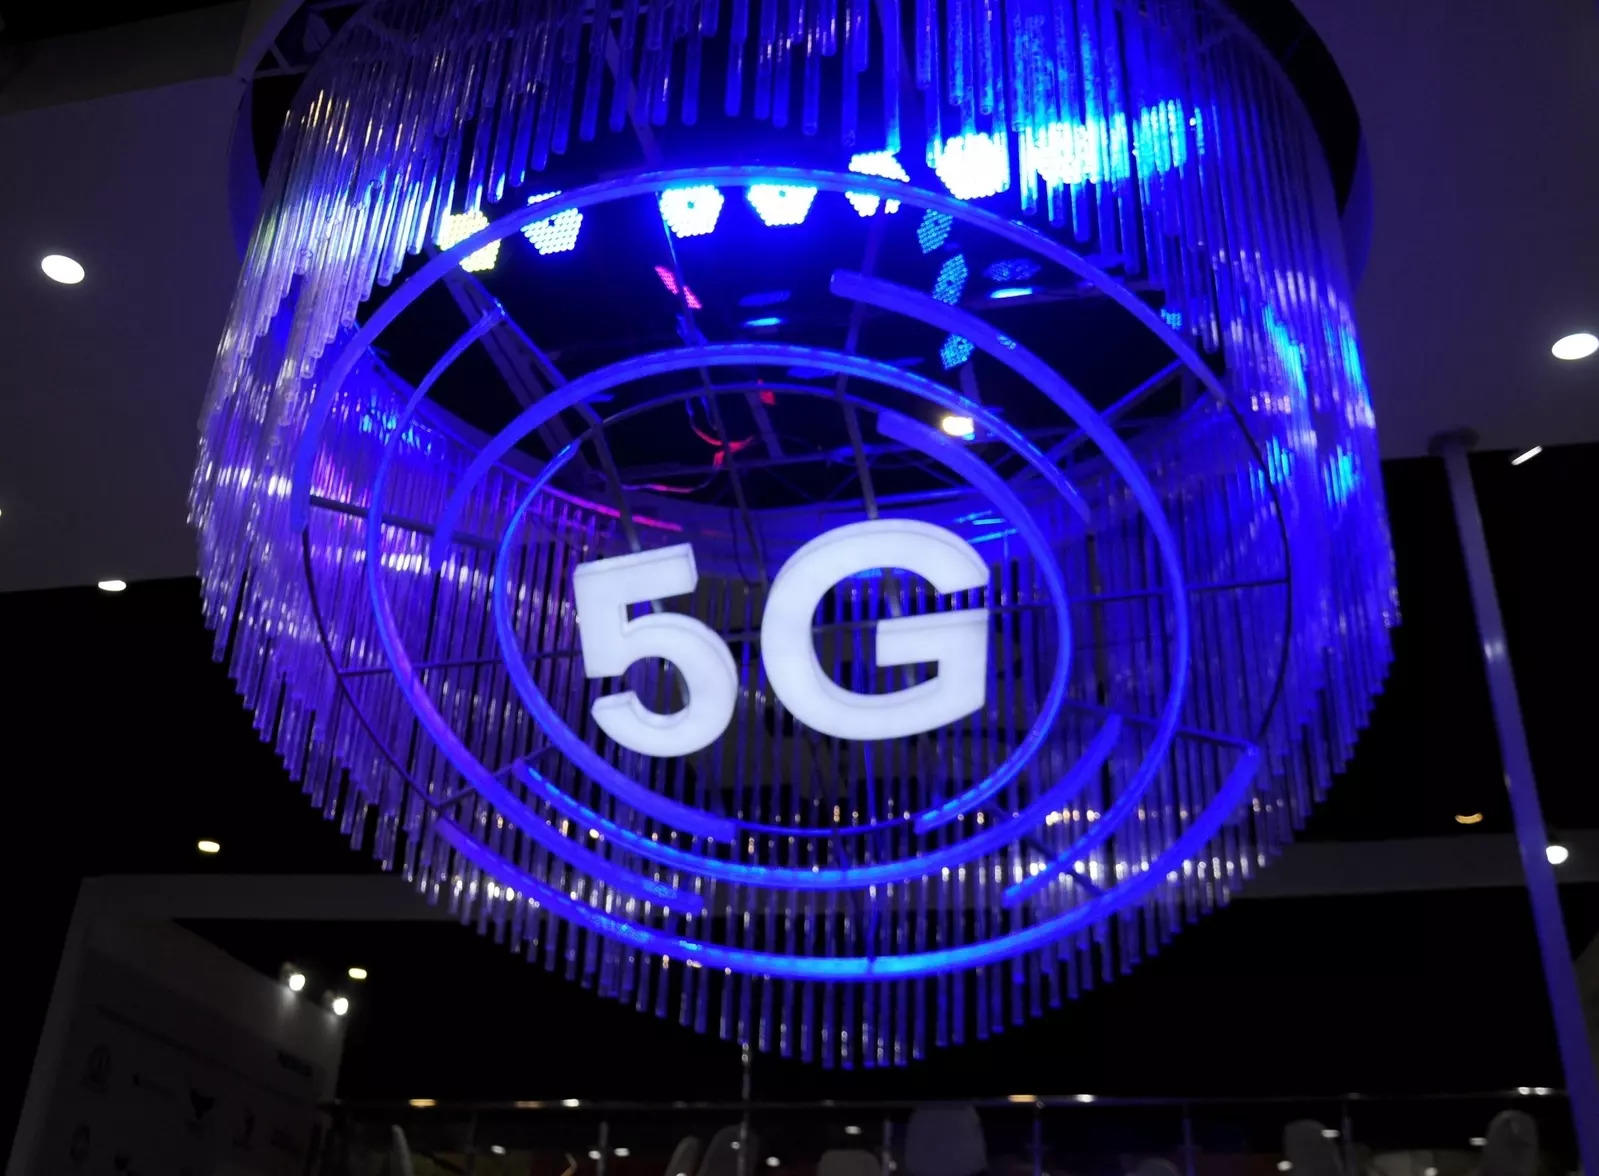 CloudExtel and Shaurrya Teleservices want to condense the 5G infrastructure